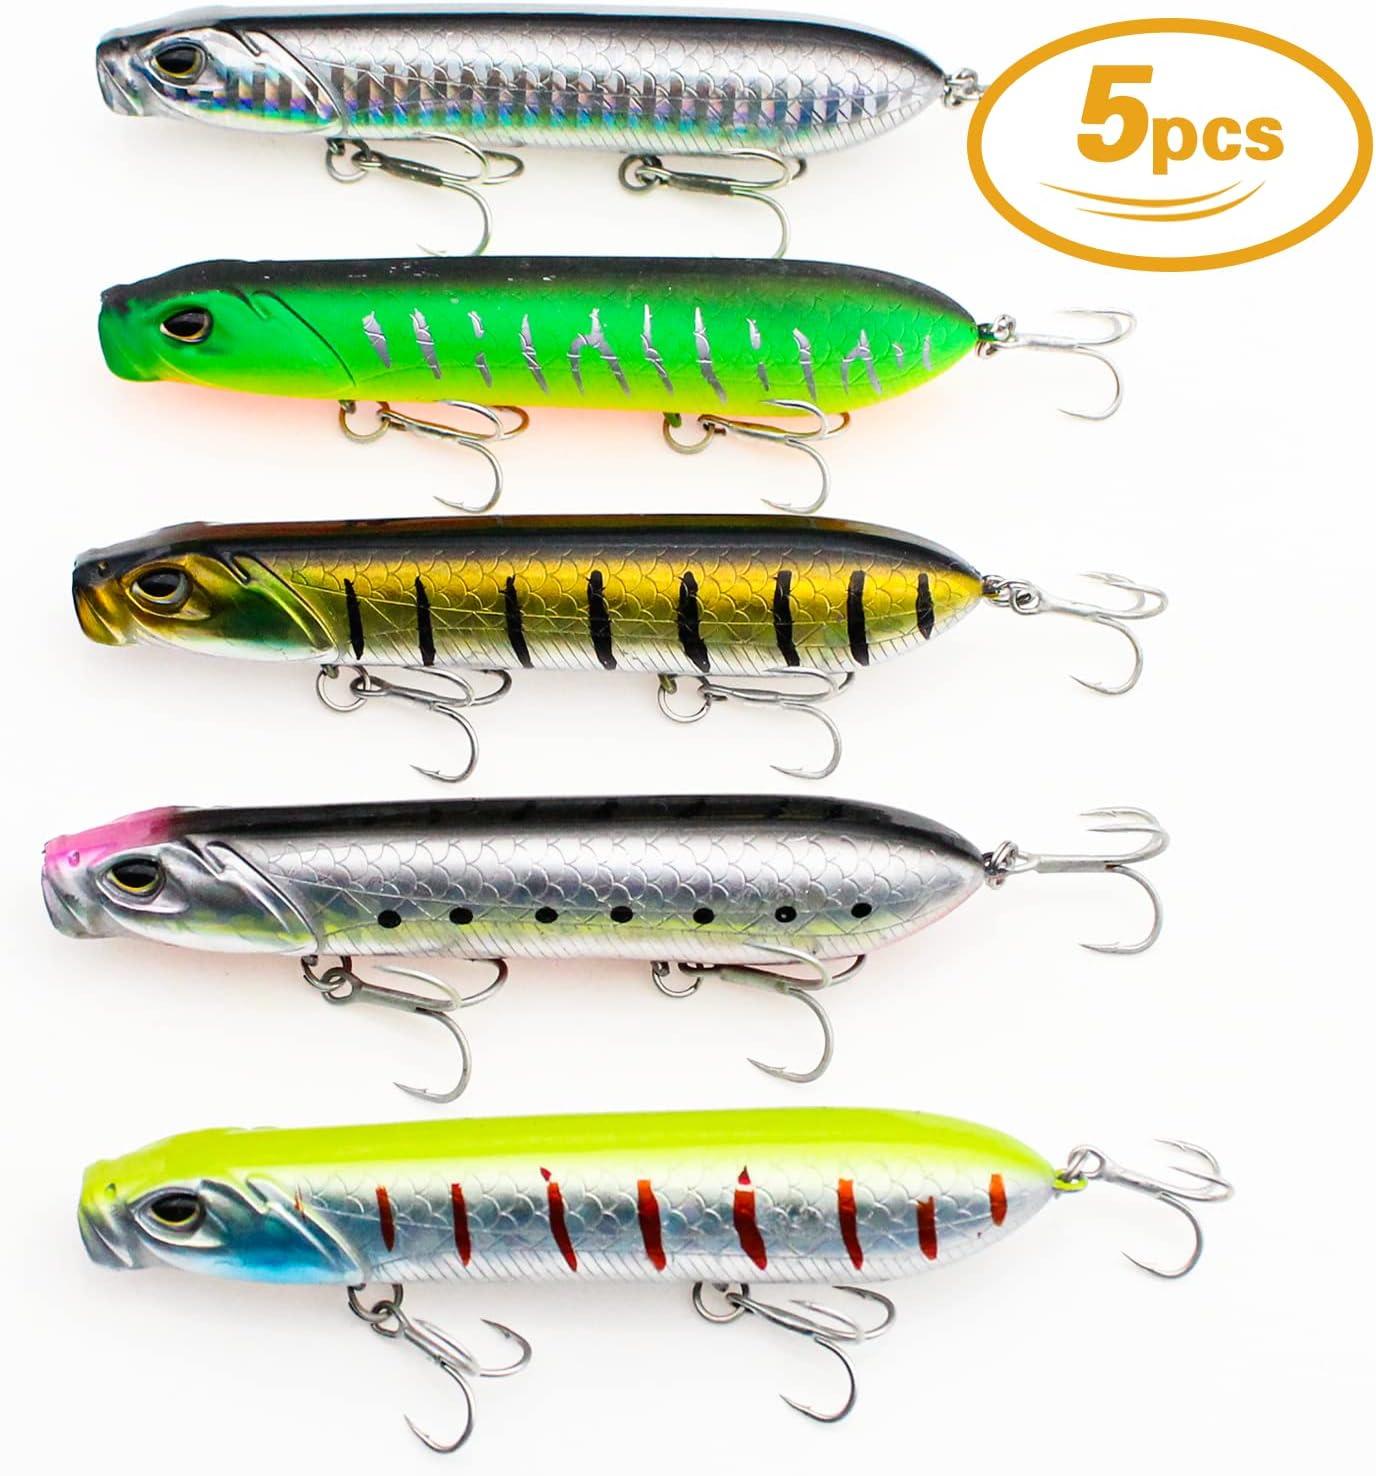 5Pcs Fishing Lure Topwater Large Hard Bait Minnow Lure With 2